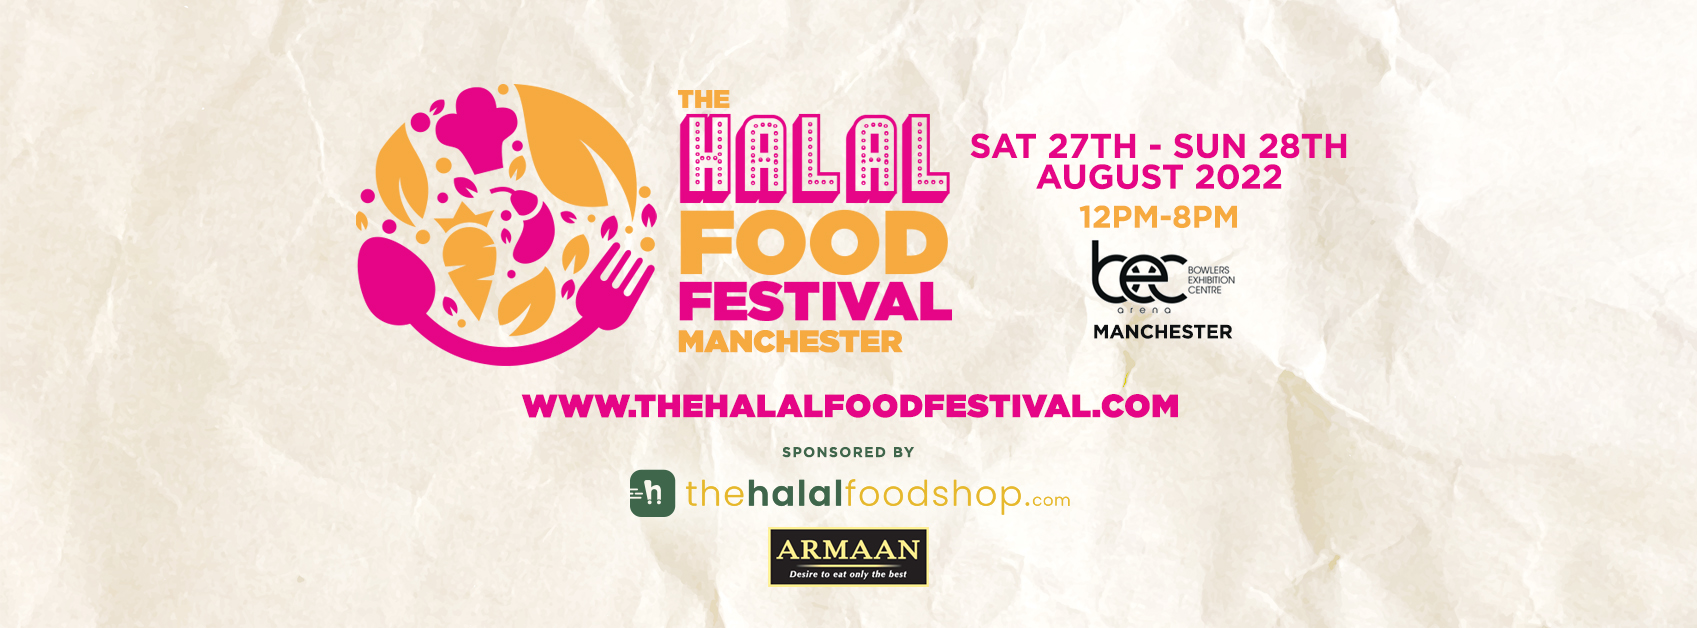 The Halal Food Festival Manchester Over 80 Sold Out At Bowlers